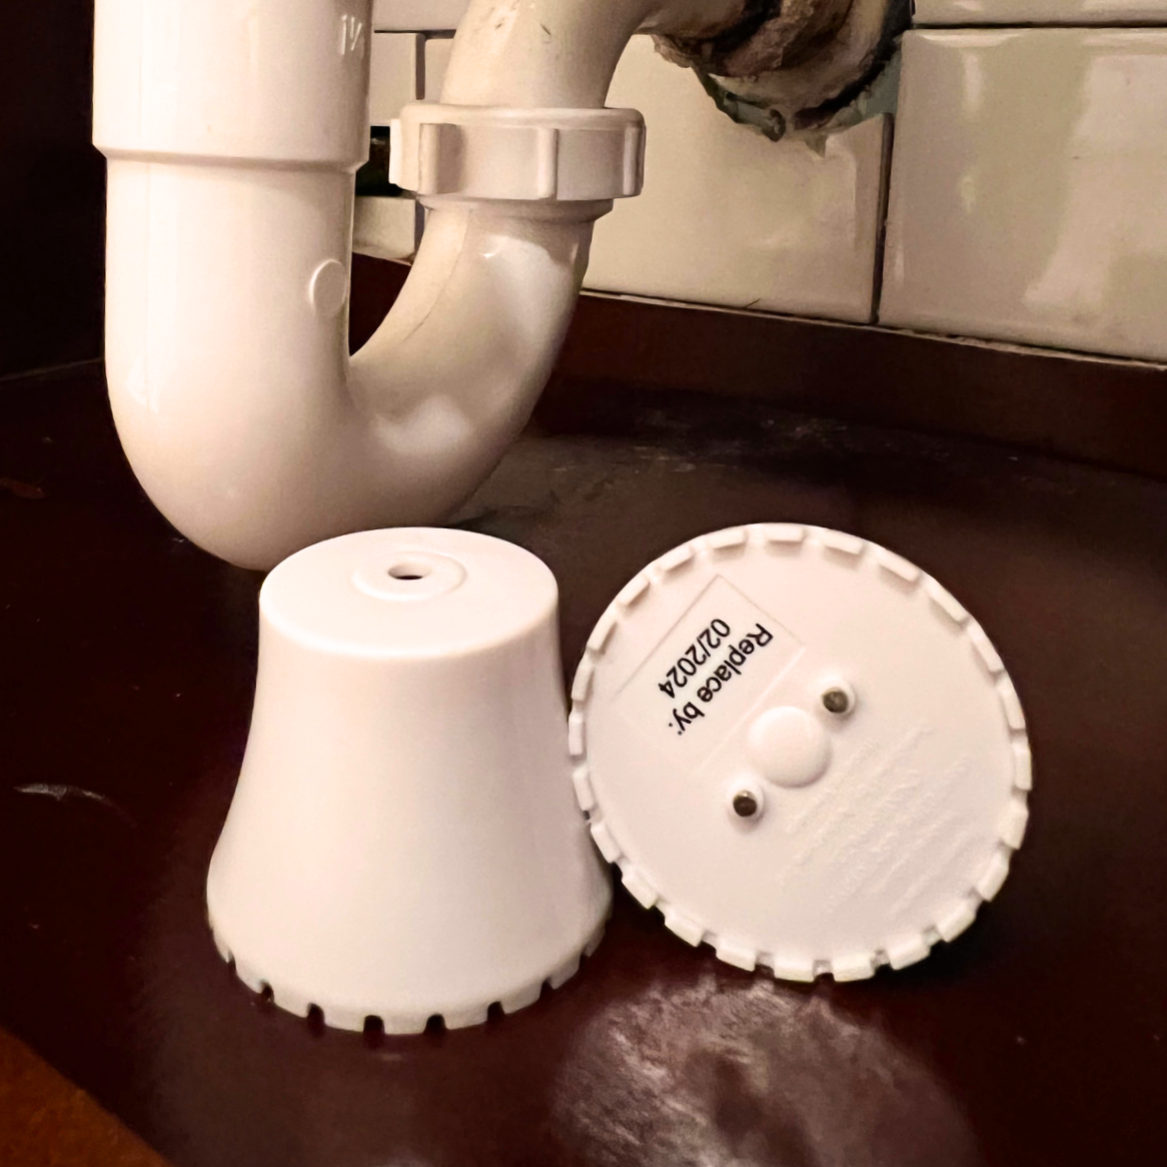 Simple low-cost solution to costly water damage. Flood Buzz are small water leak alarms placed in likely leaky spots throughout your home. At the drop of water, the alarm sounds, alerting you to a leak and avoiding expensive water damage.